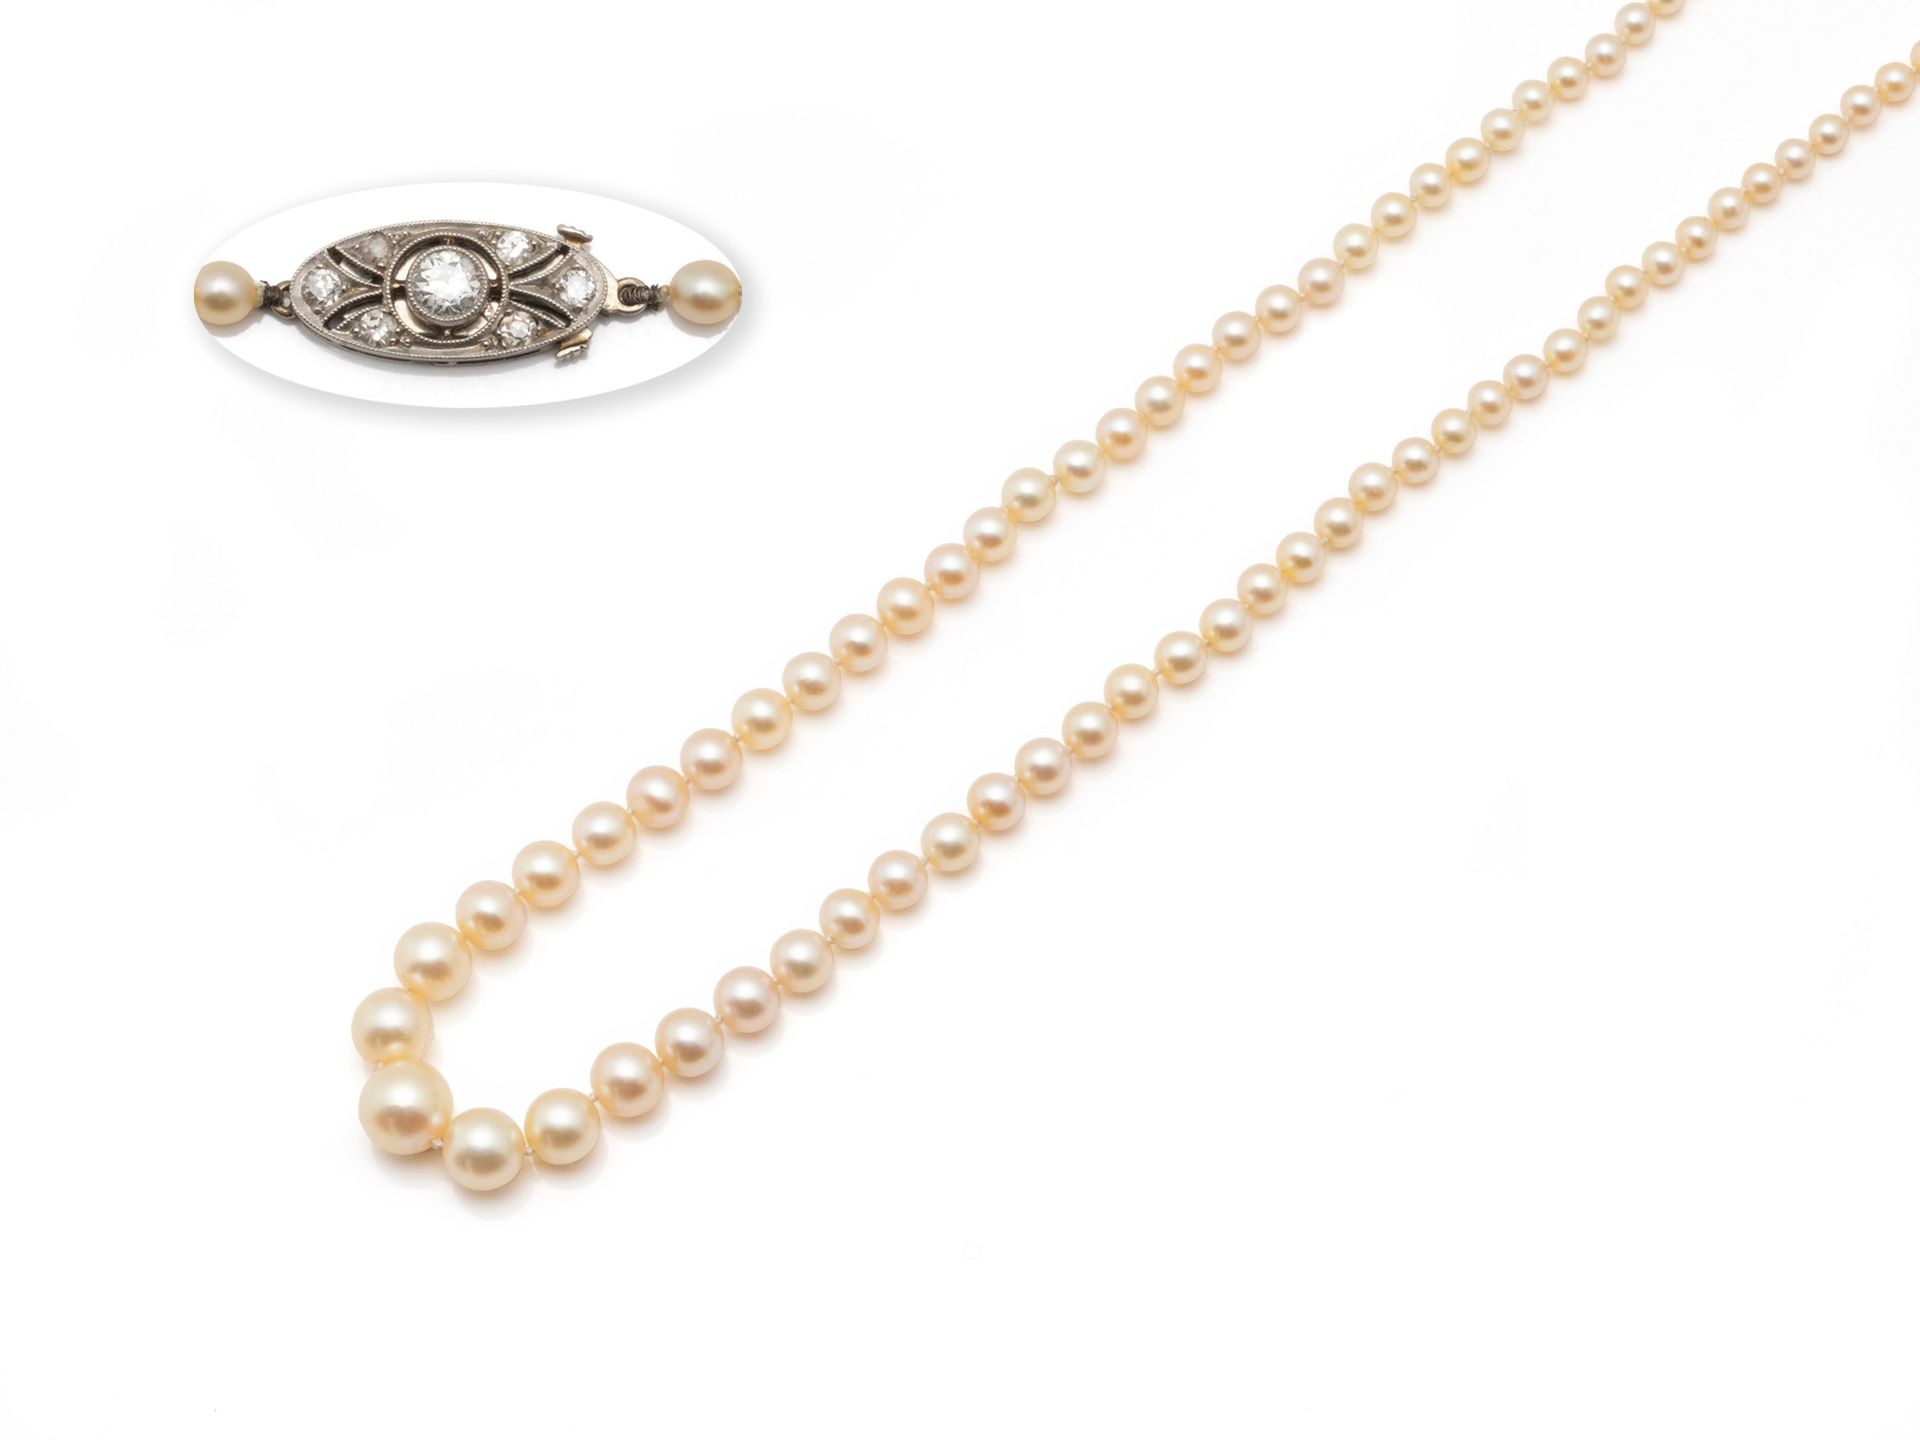 Null Necklace featuring a drop of fine pearls, approx. 2.7 to 7.2 mm. It is ador&hellip;